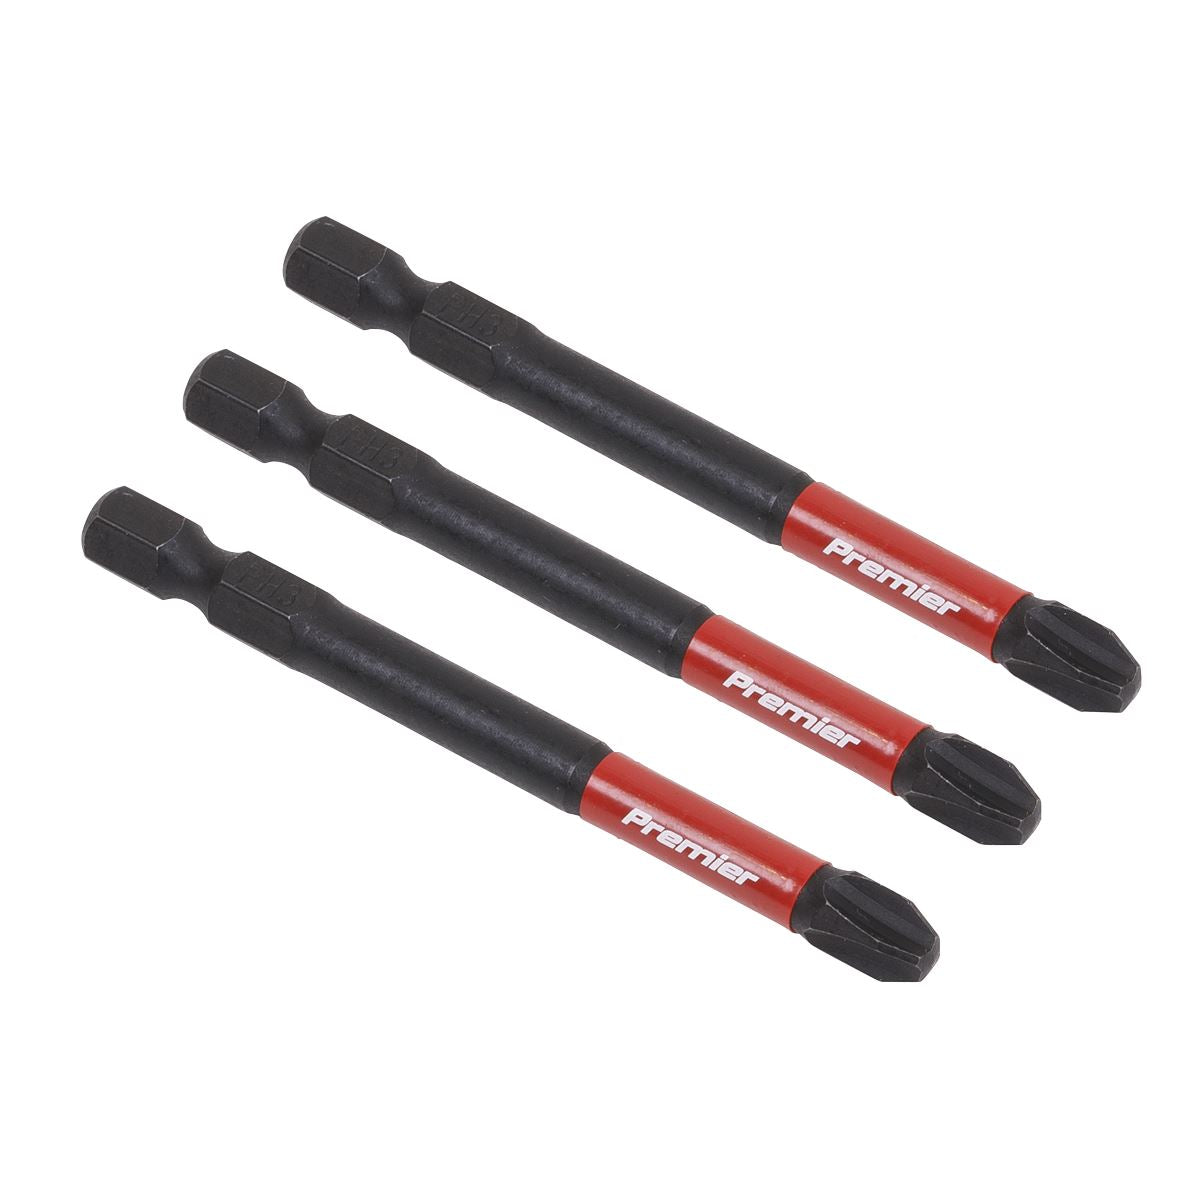 Sealey Premier Phillips #3 Impact Power Tool Bits 75mm - 3pc